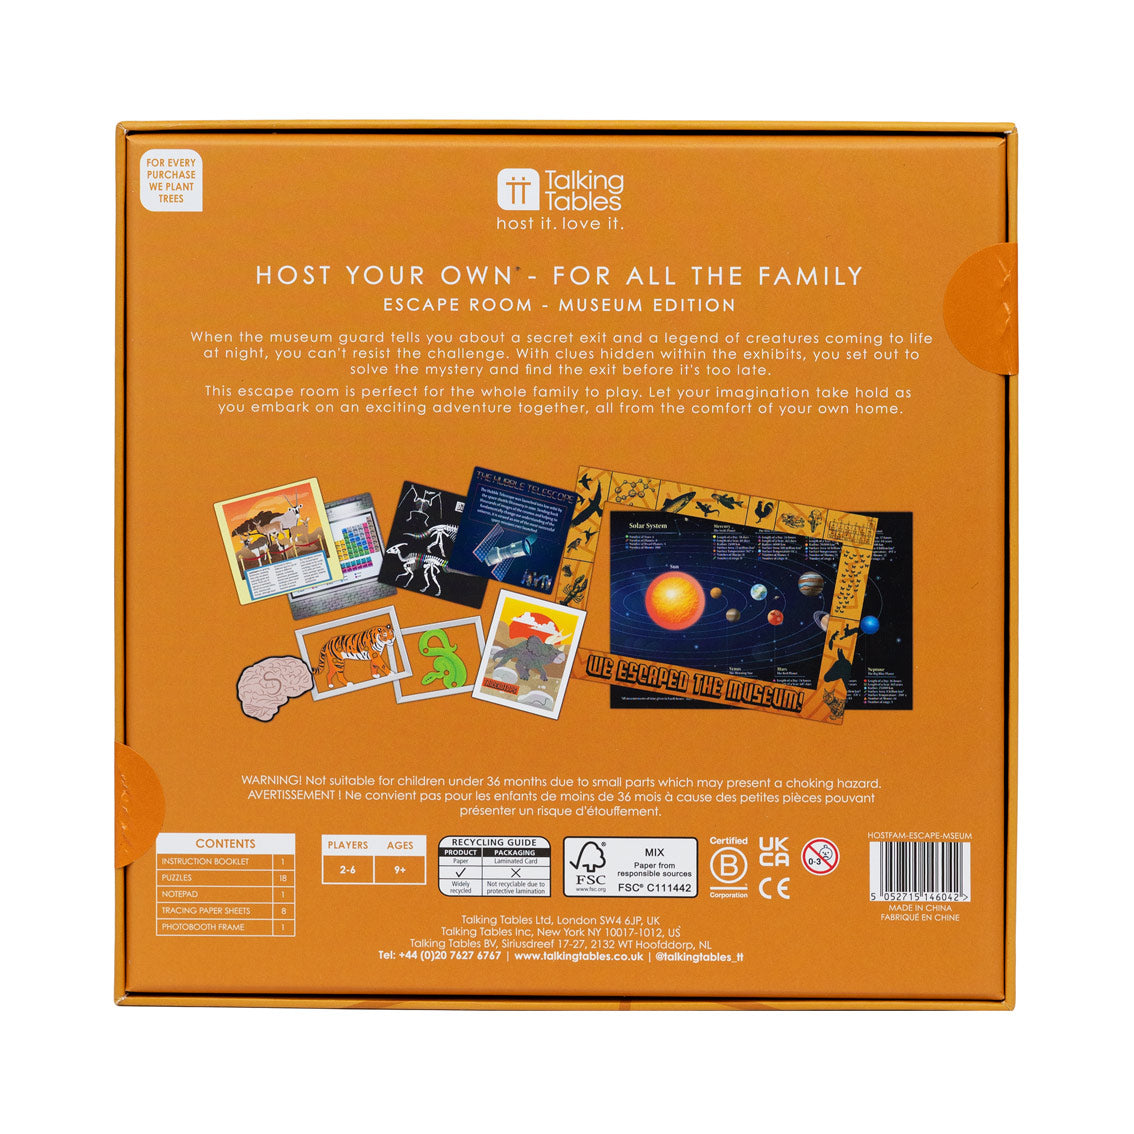 An image of the back of the Escape Room Museum edition box.